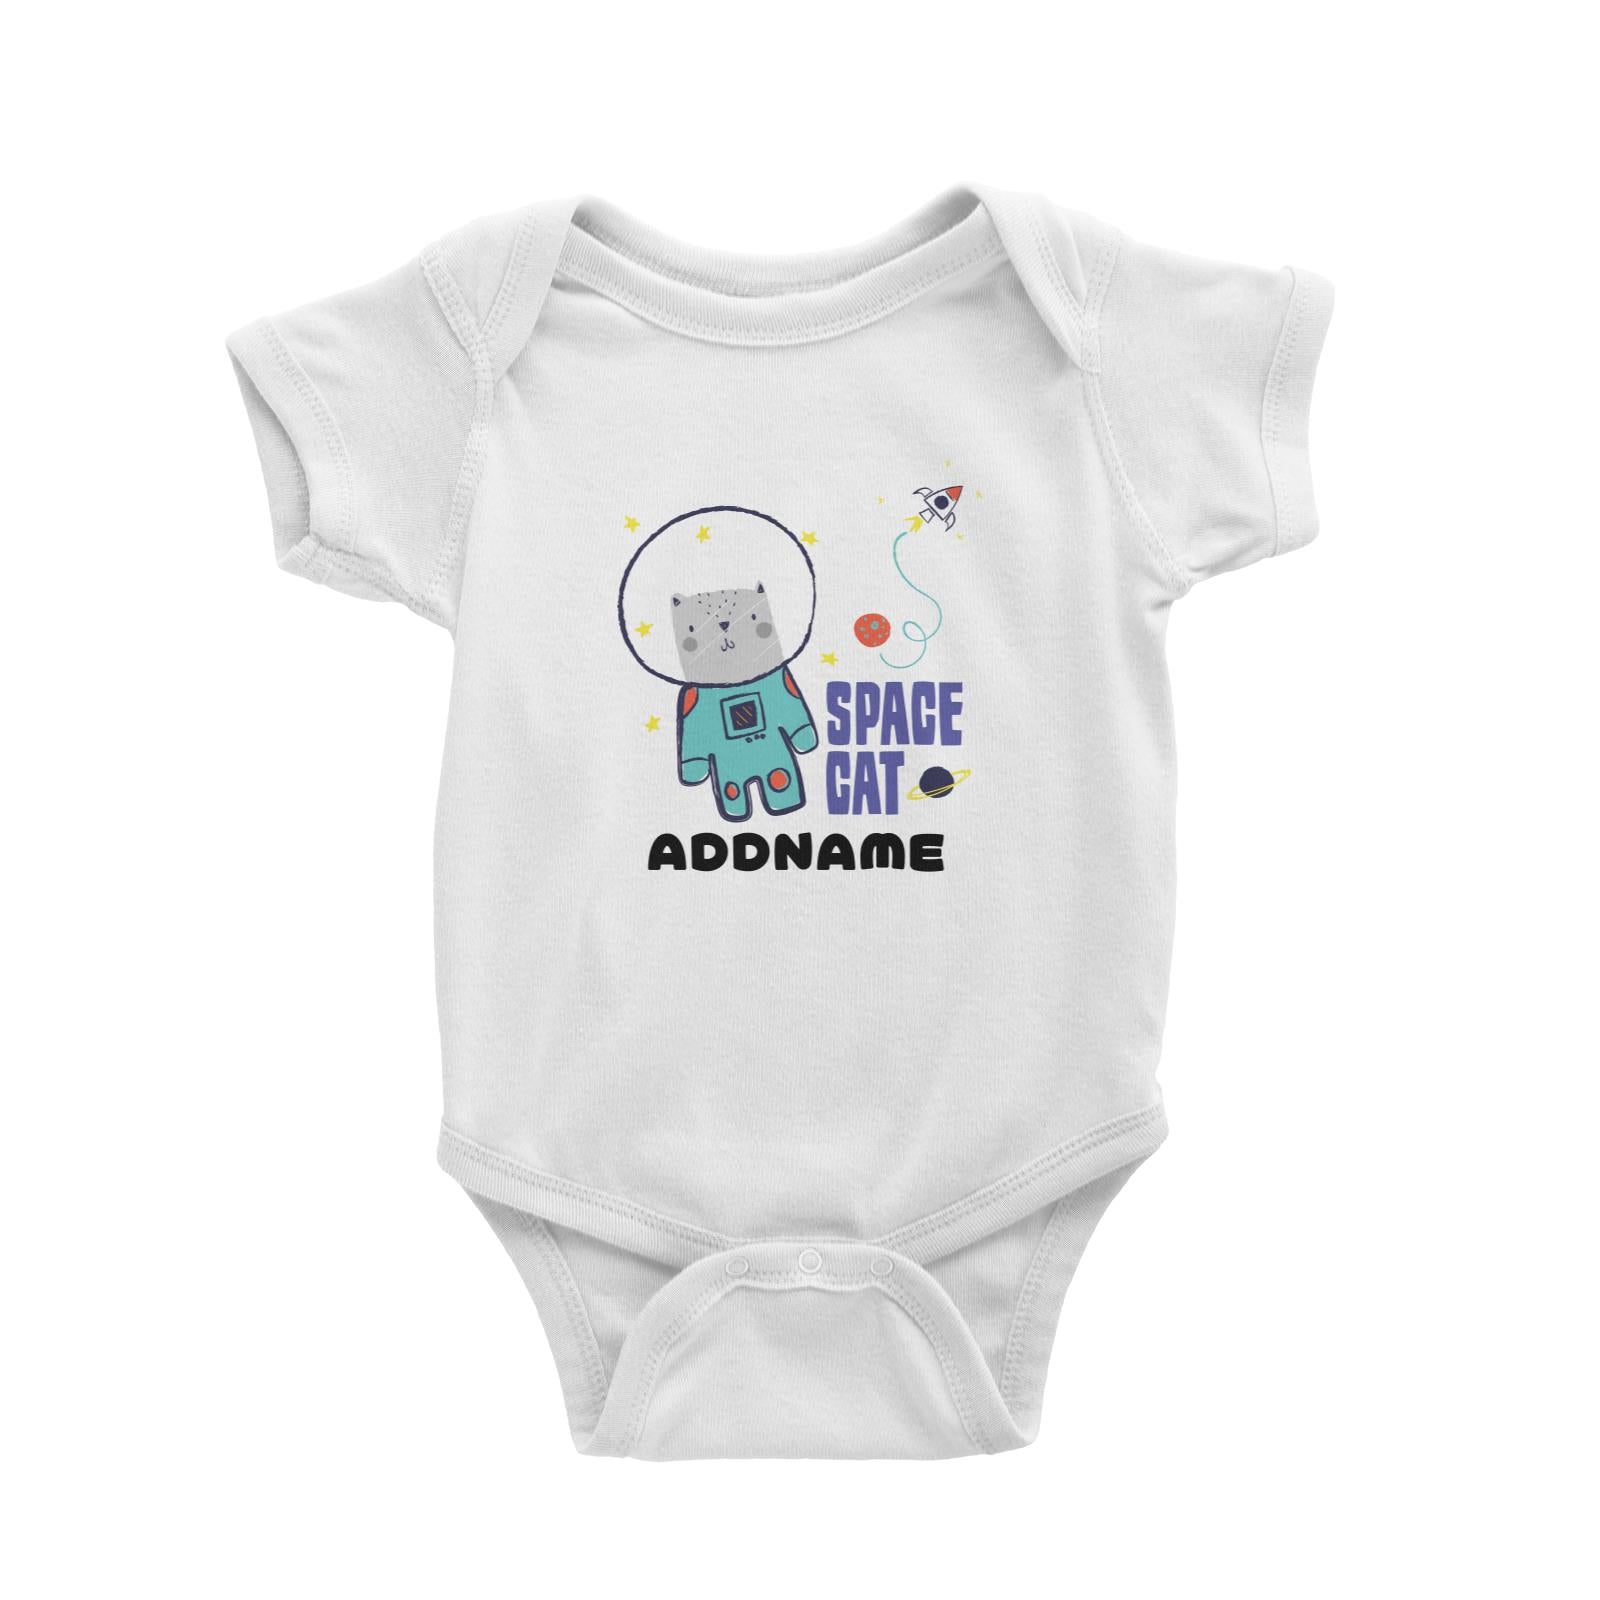 Space Cat Addname White Baby Romper